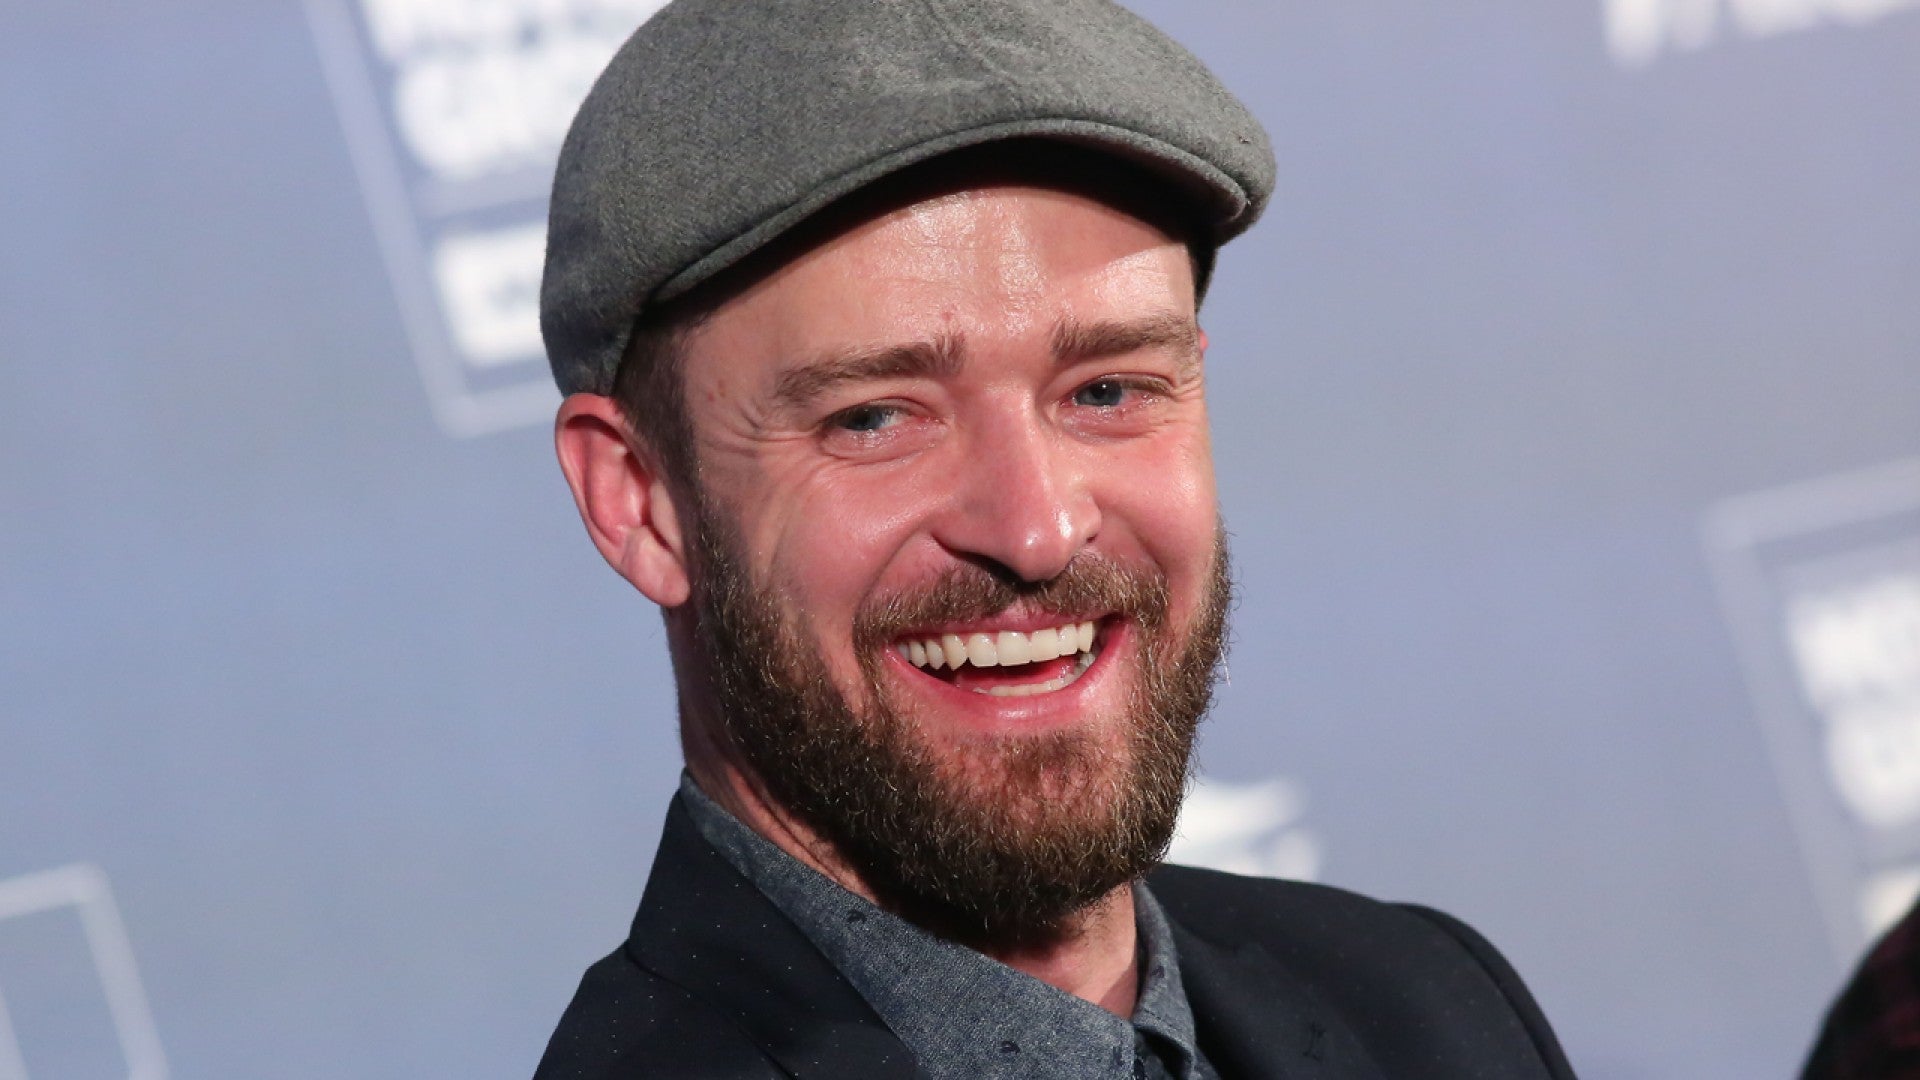 Justin Timberlake and Son Silas Step Out in Matching Beanies!